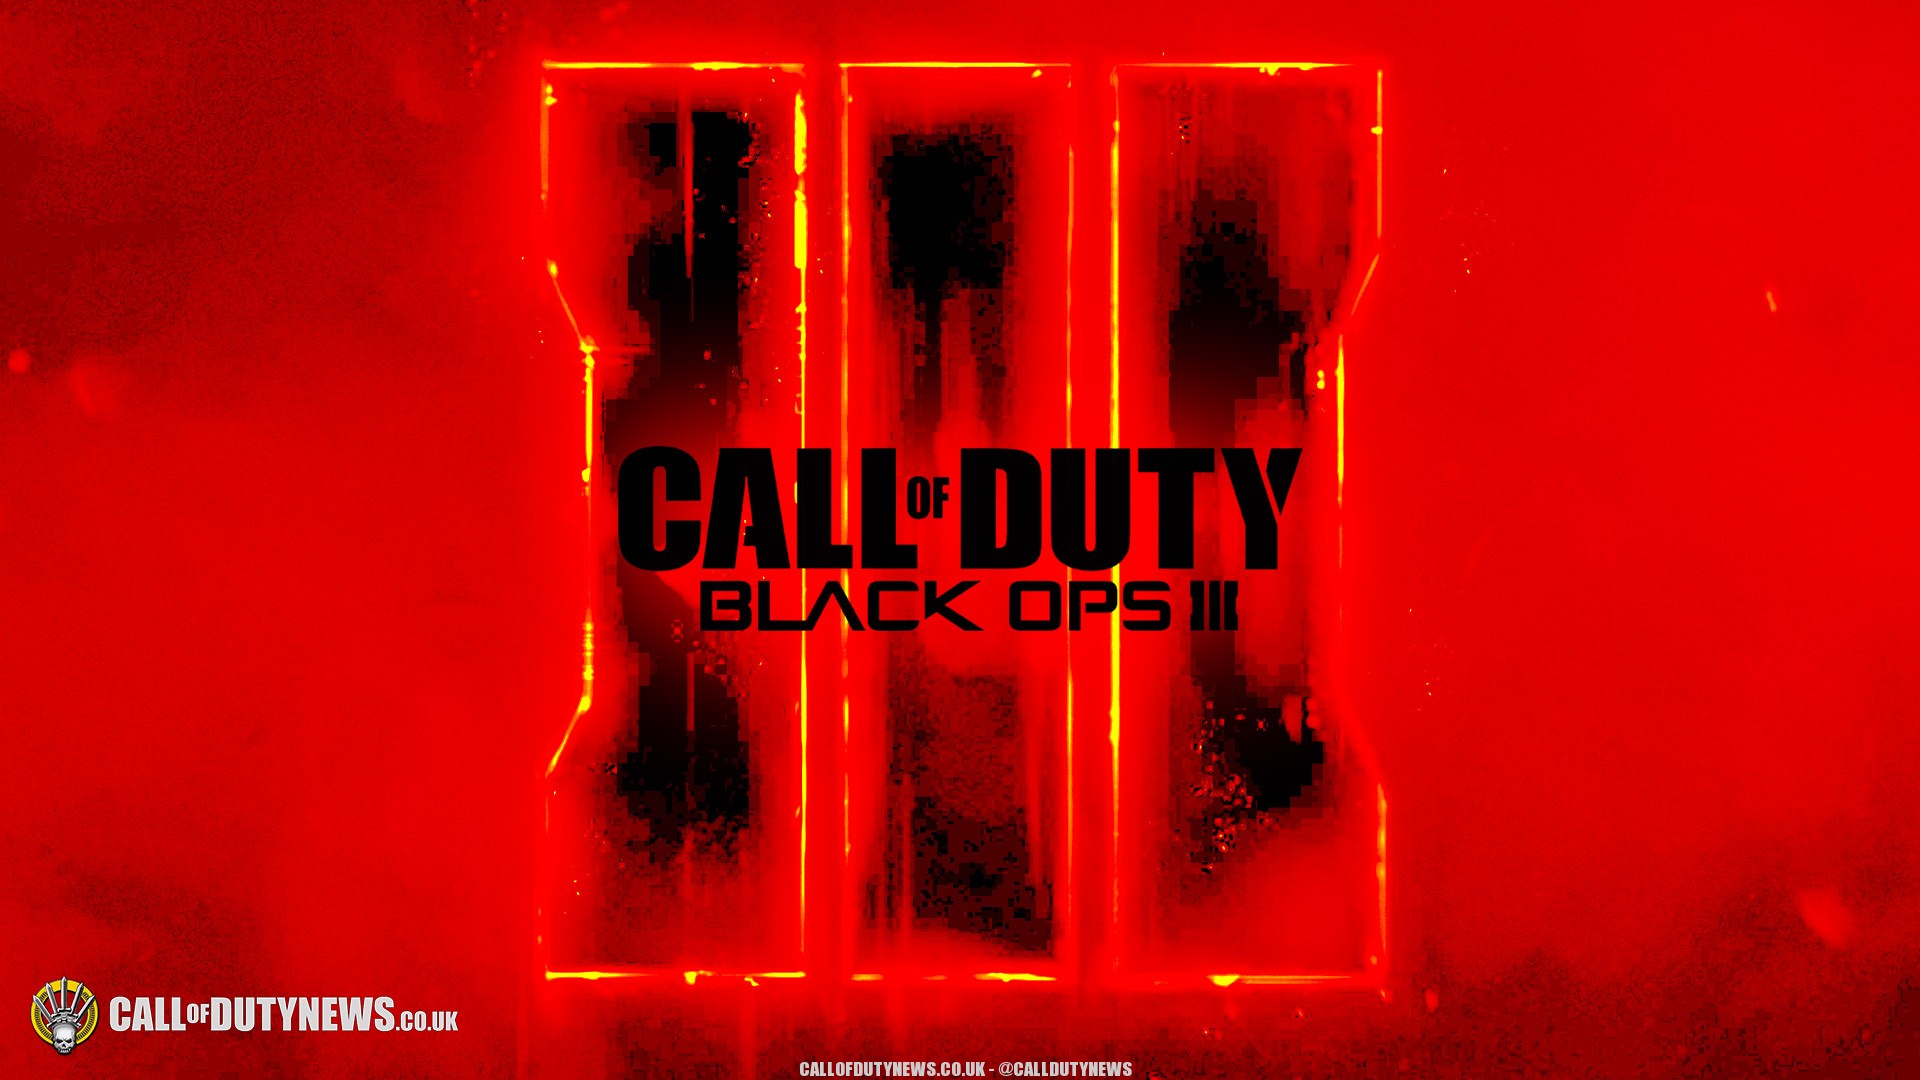 Enjoy these 1080p HD Black Ops 3 wallpapers by callofdutyblogcom 1920x1080